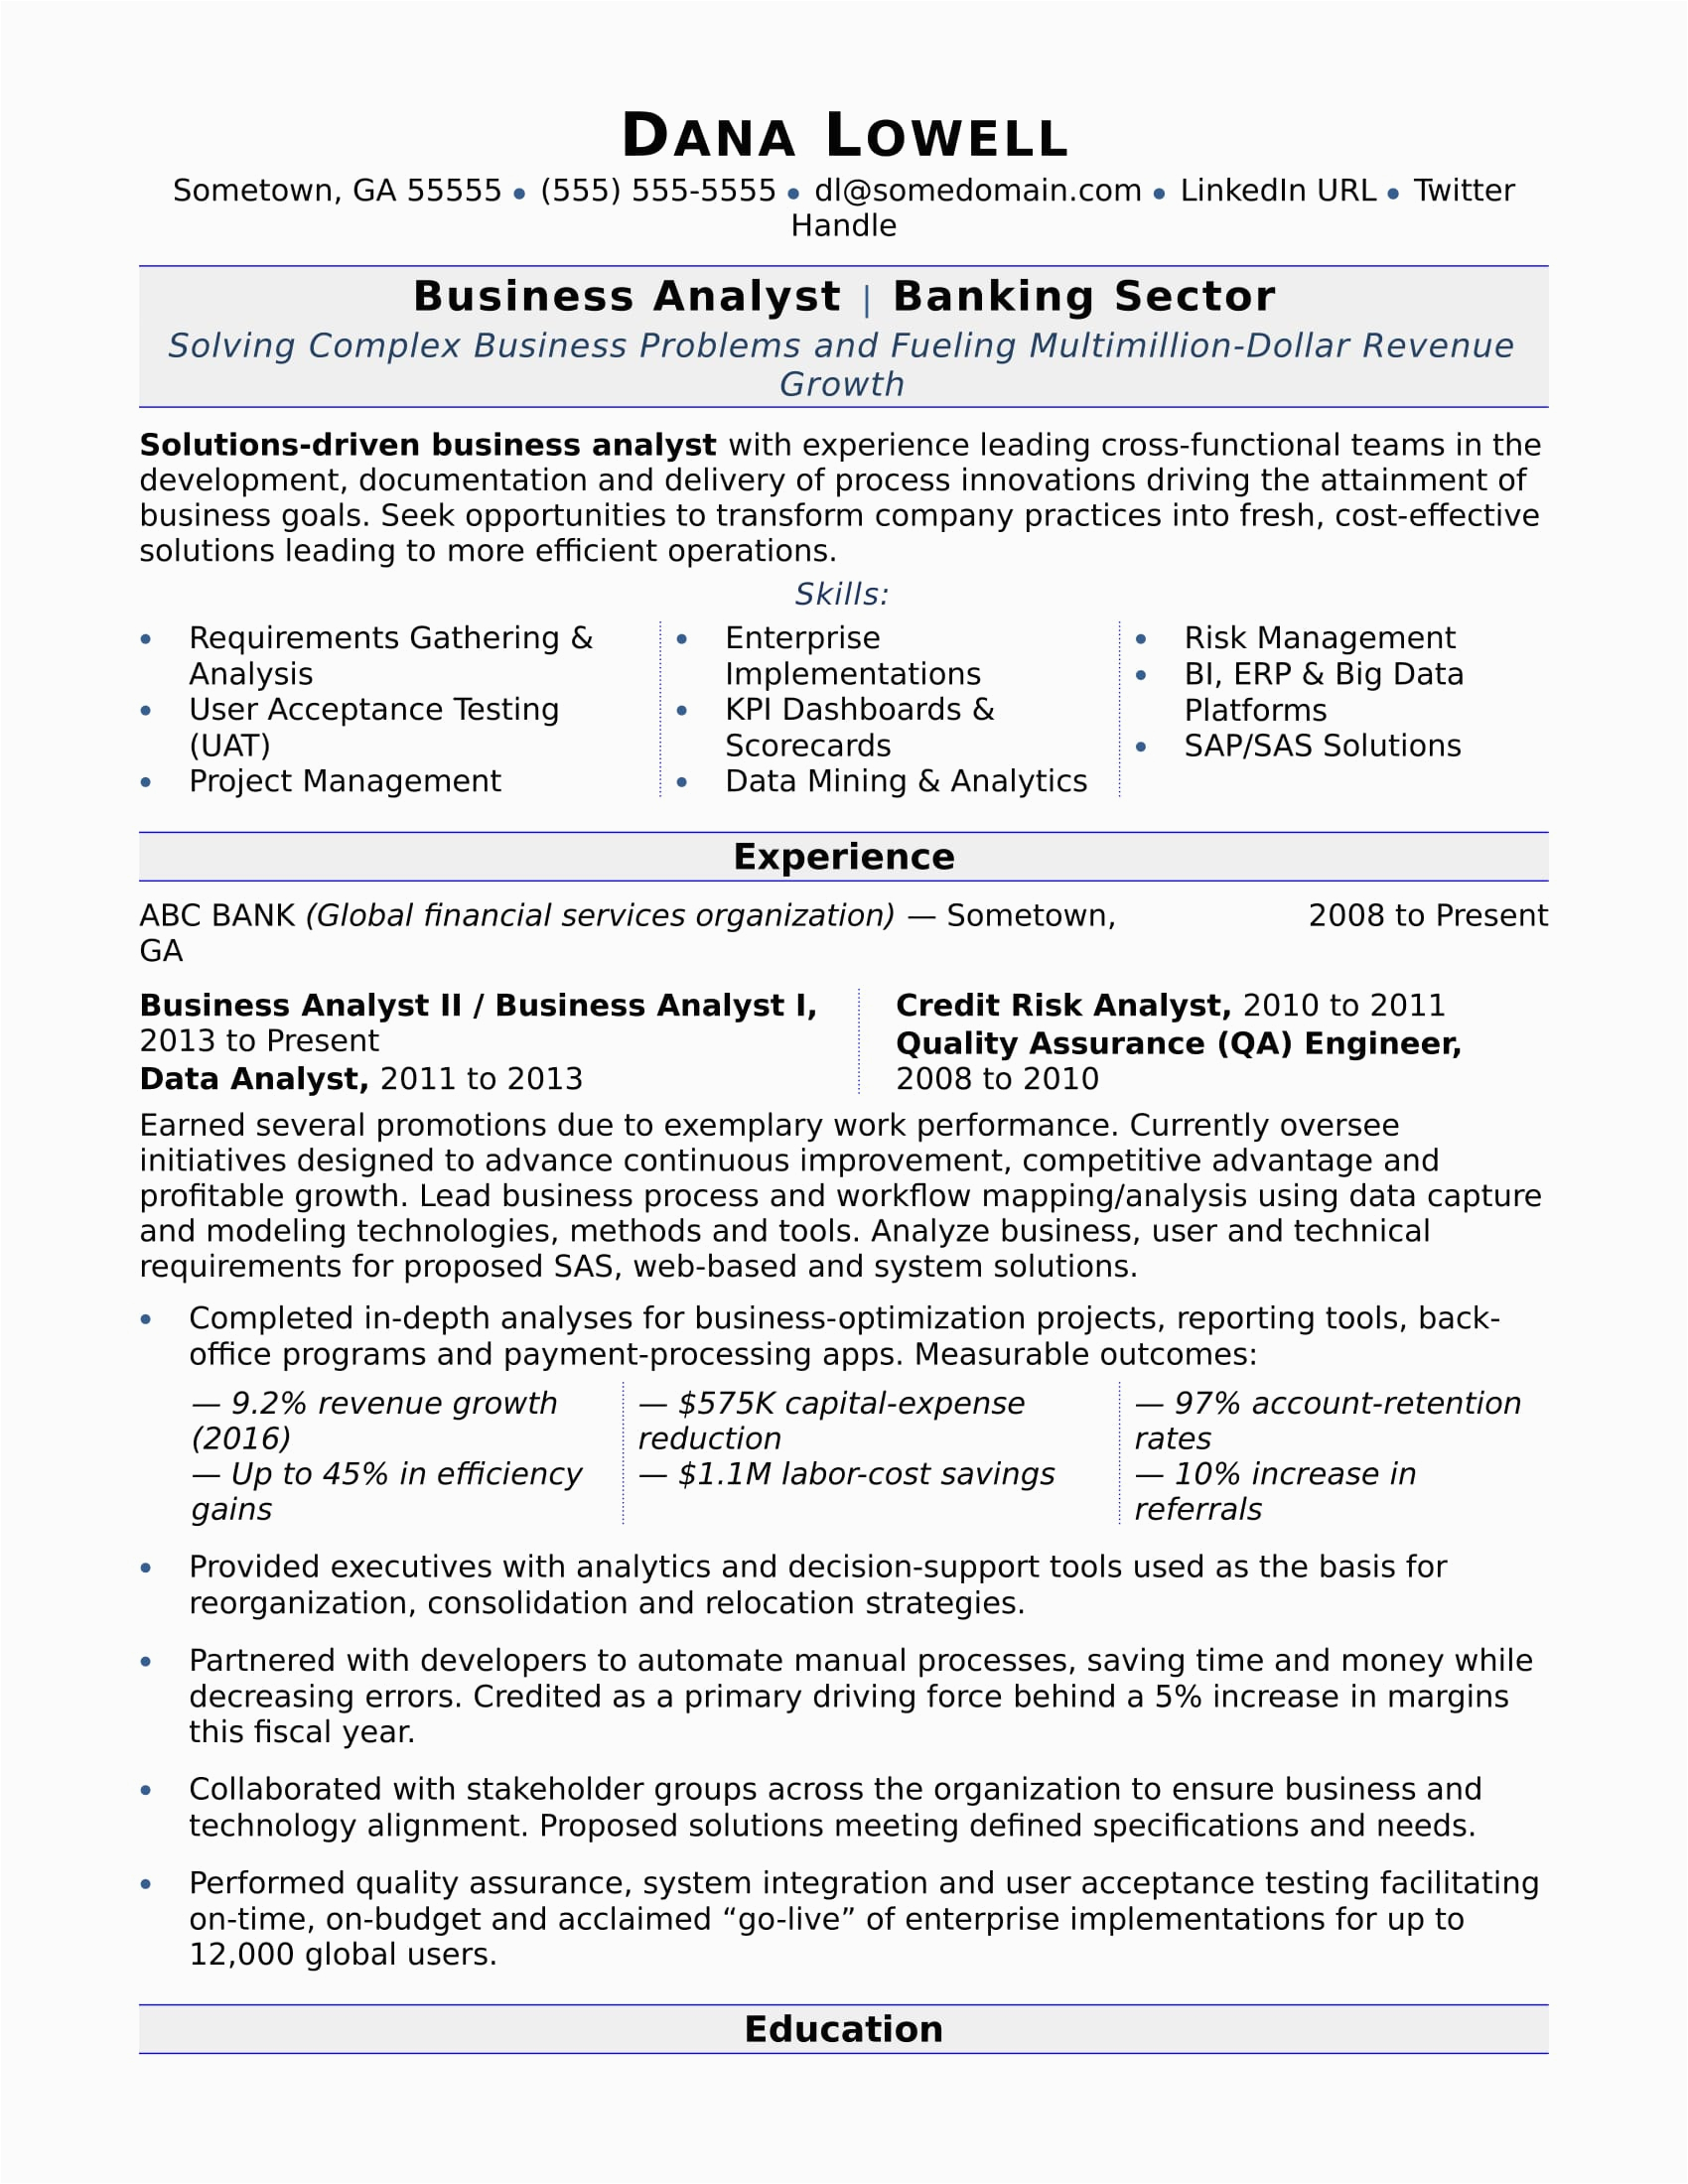 Sample Resume for Business Analyst Position Business Analyst Resume Sample